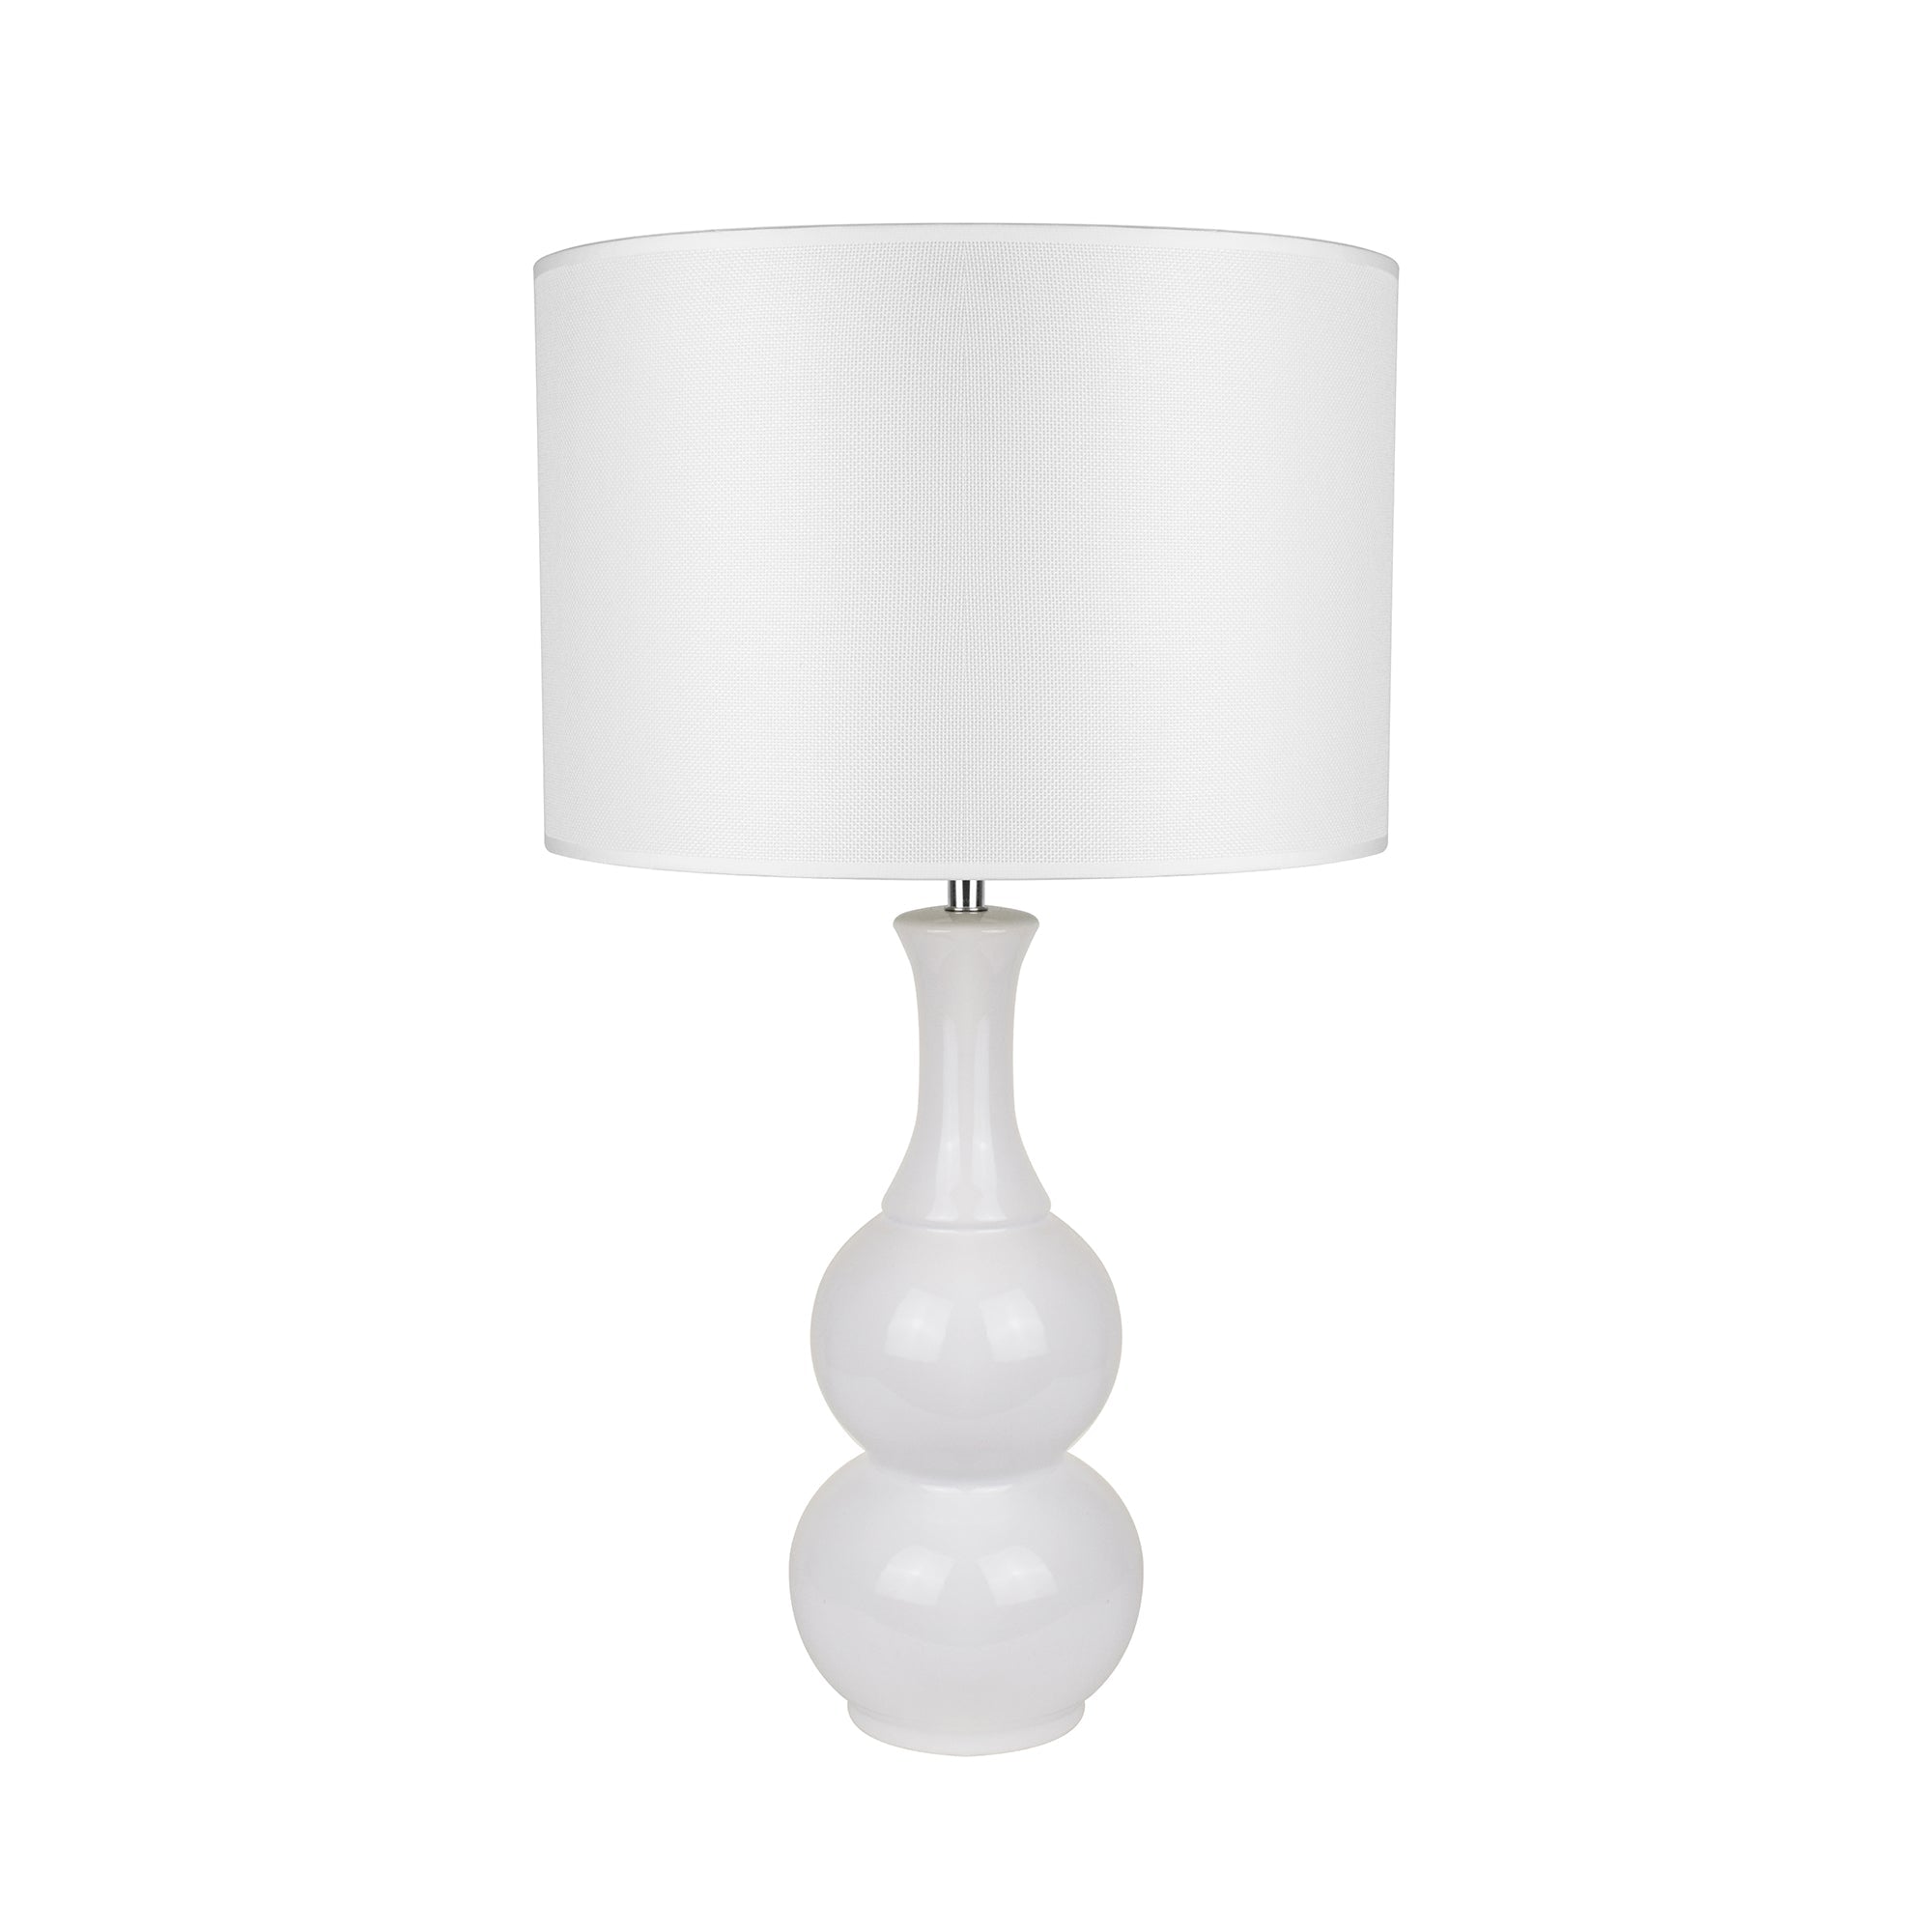 Pattery Barn Table Lamp - White